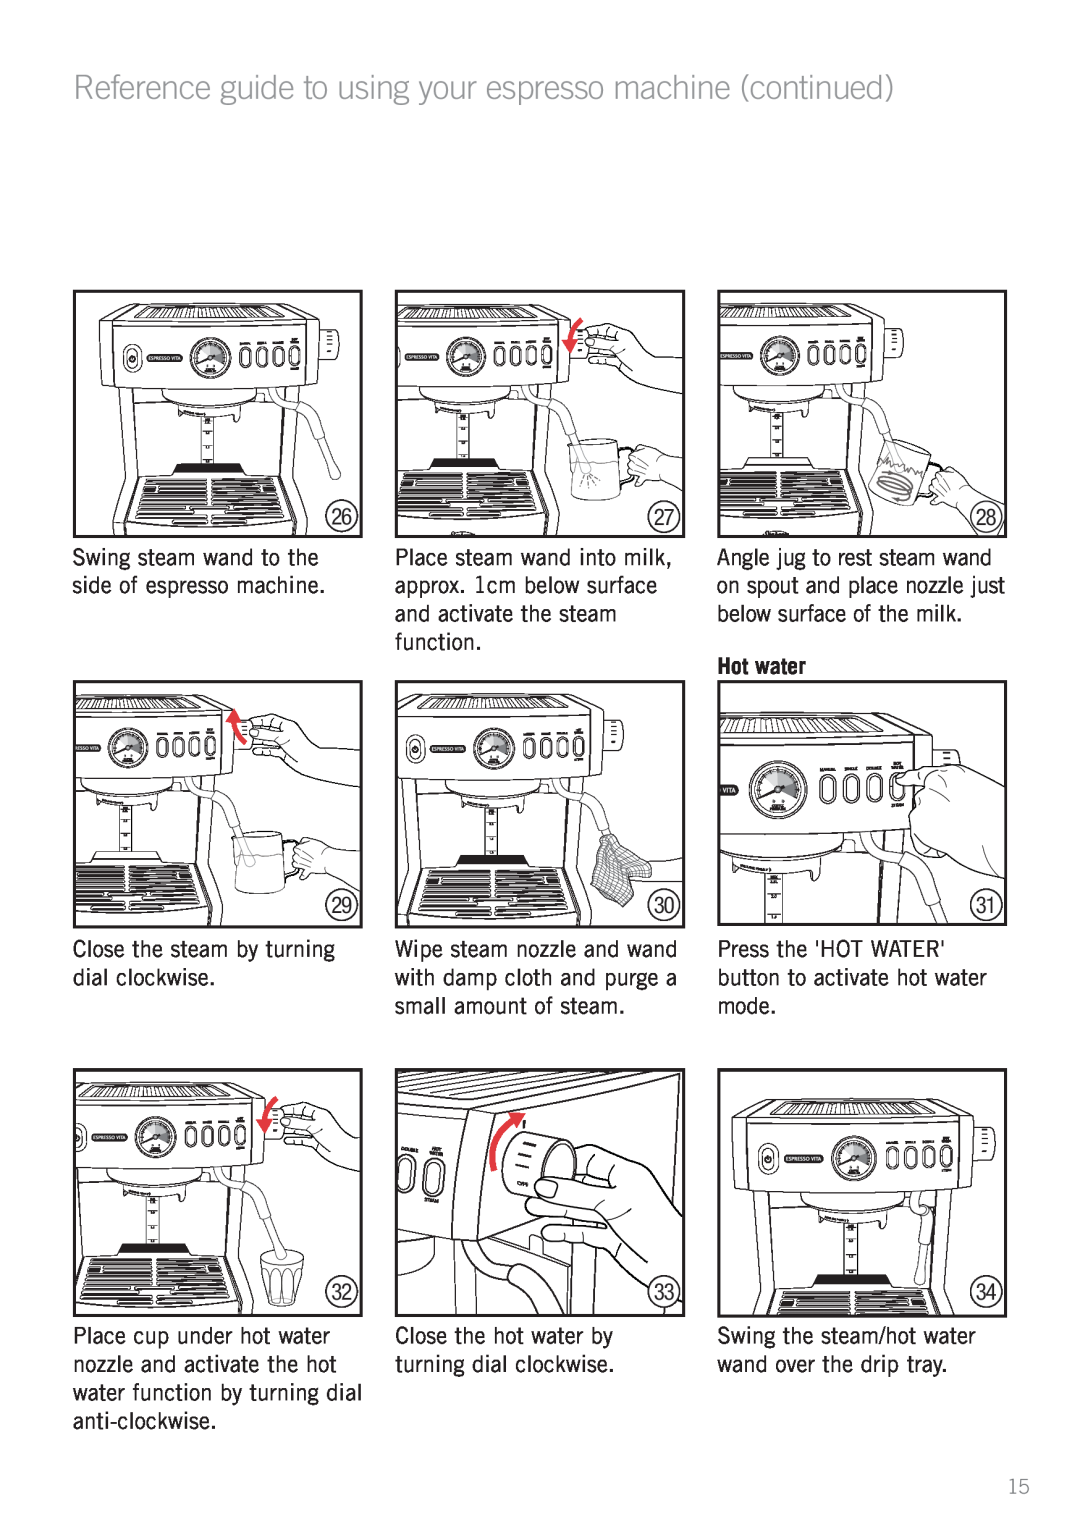 Sunbeam EM6200 manual Hot water, Reference guide to using your espresso machine continued 